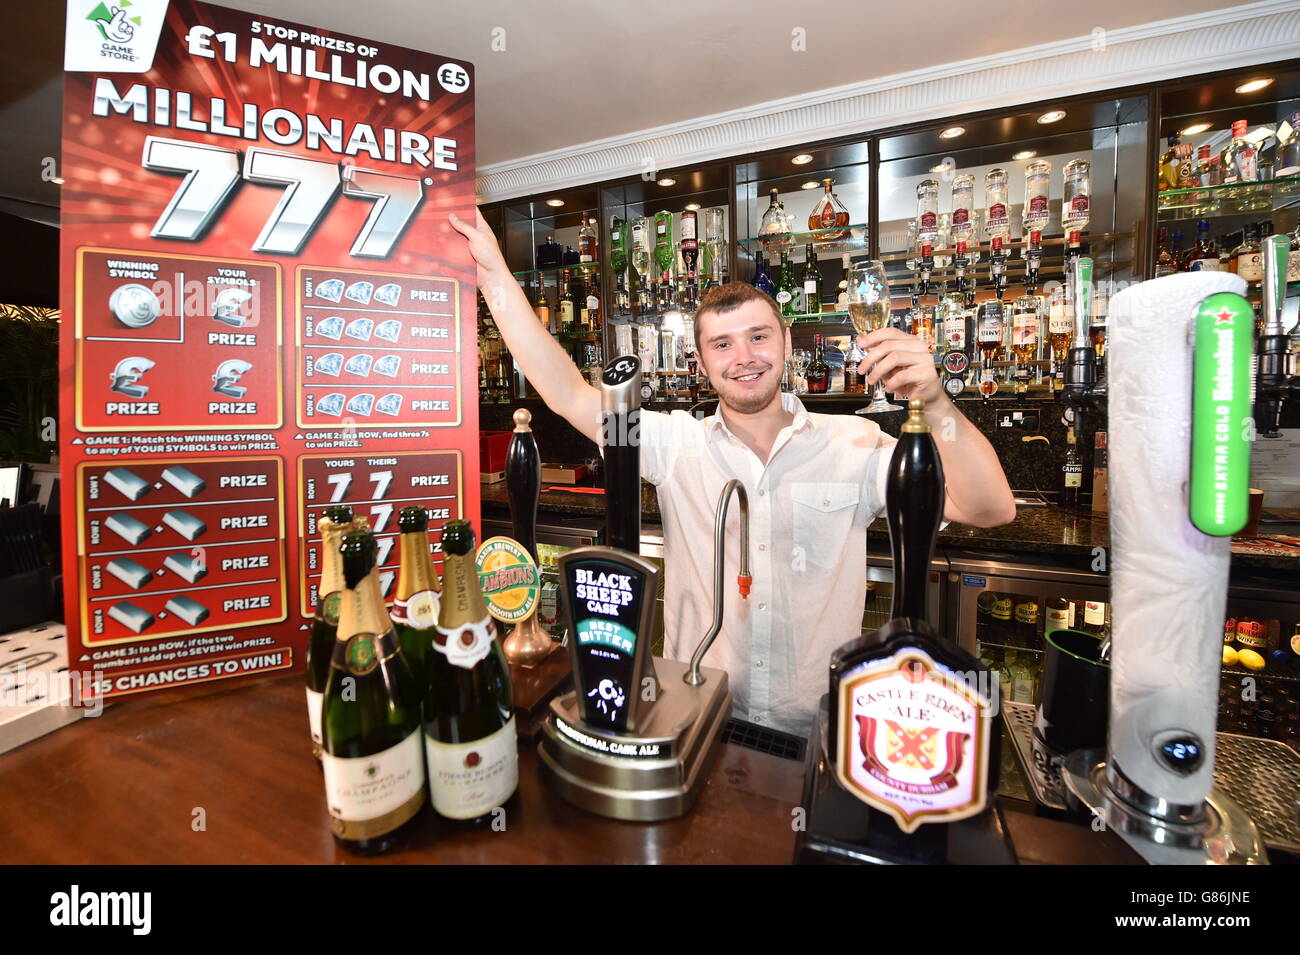 22 year old Lewis Rider celebrates after winning &pound;1m on a National Lottery Scratchcard at Ramside Hall Hotel in Durham. Stock Photo